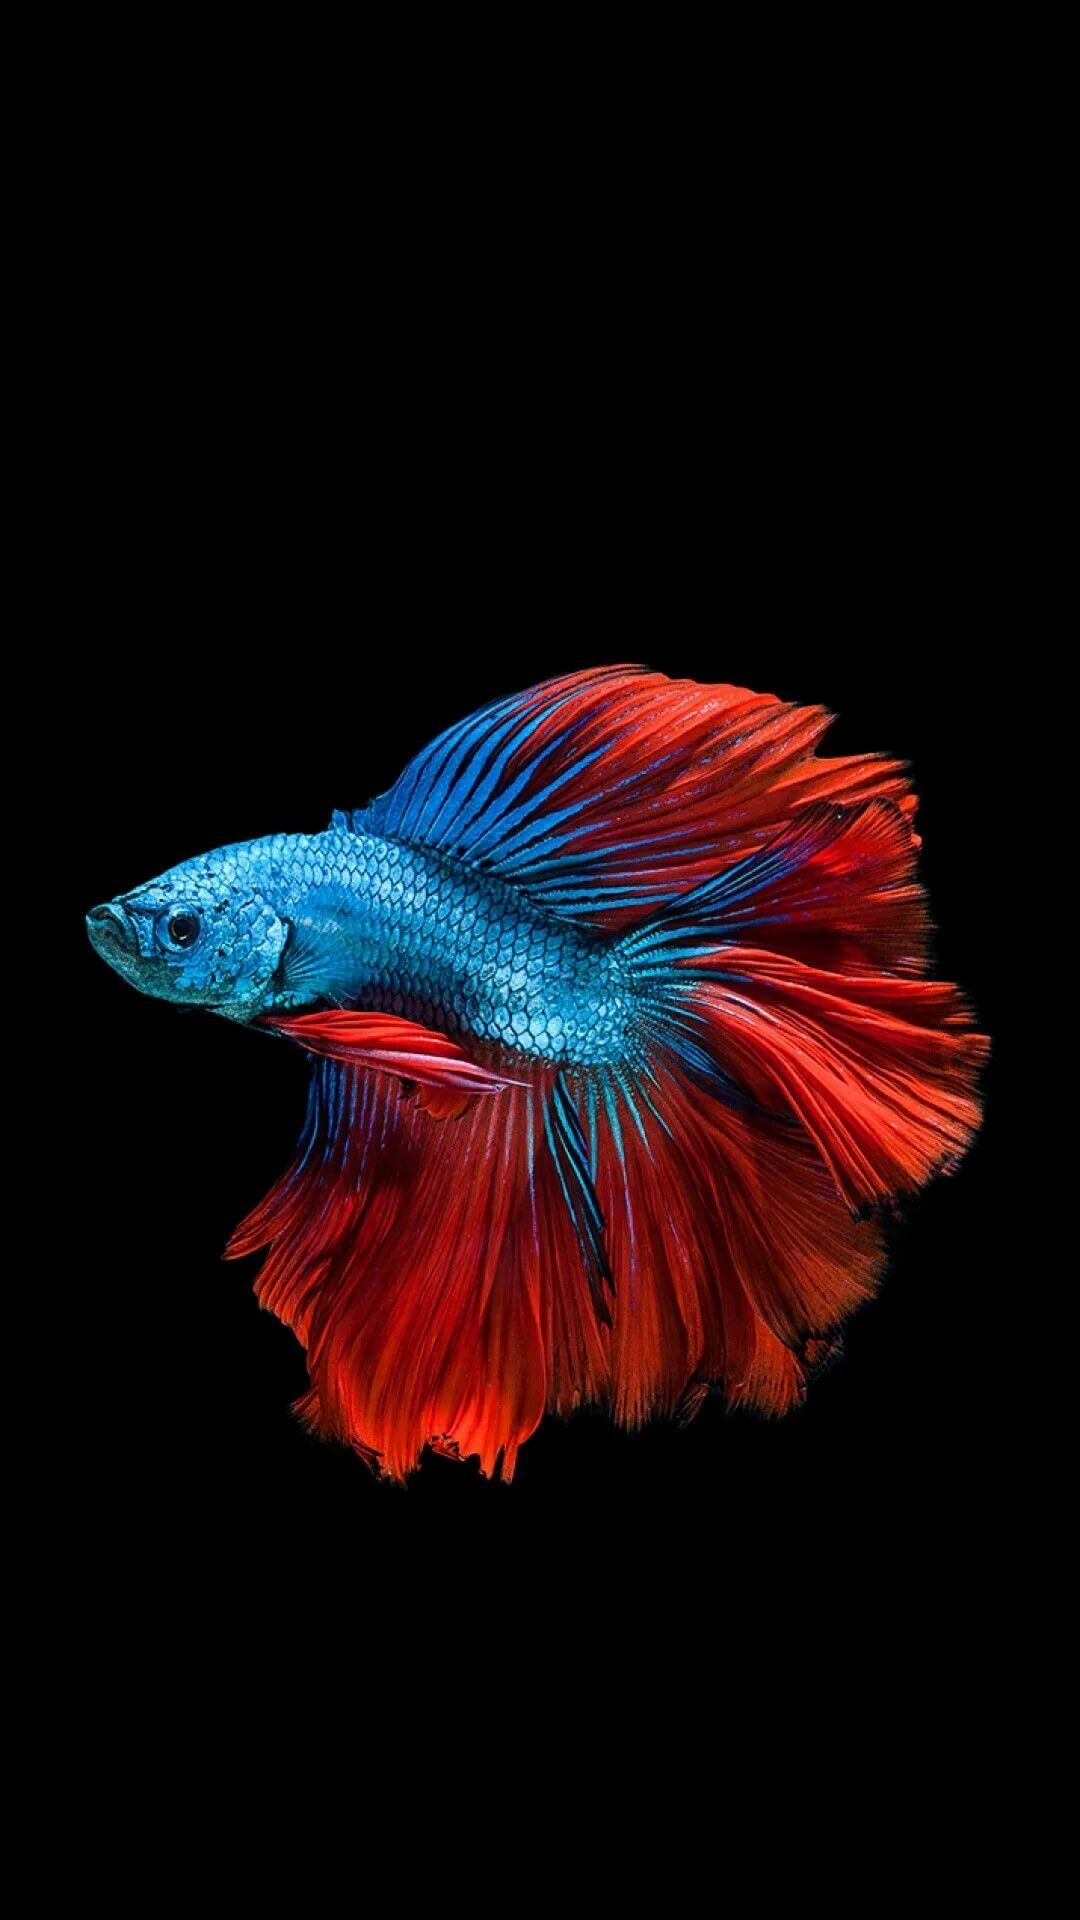 Fish: Betta, A freshwater species indigenous to Southeast Asia. 1080x1920 Full HD Wallpaper.